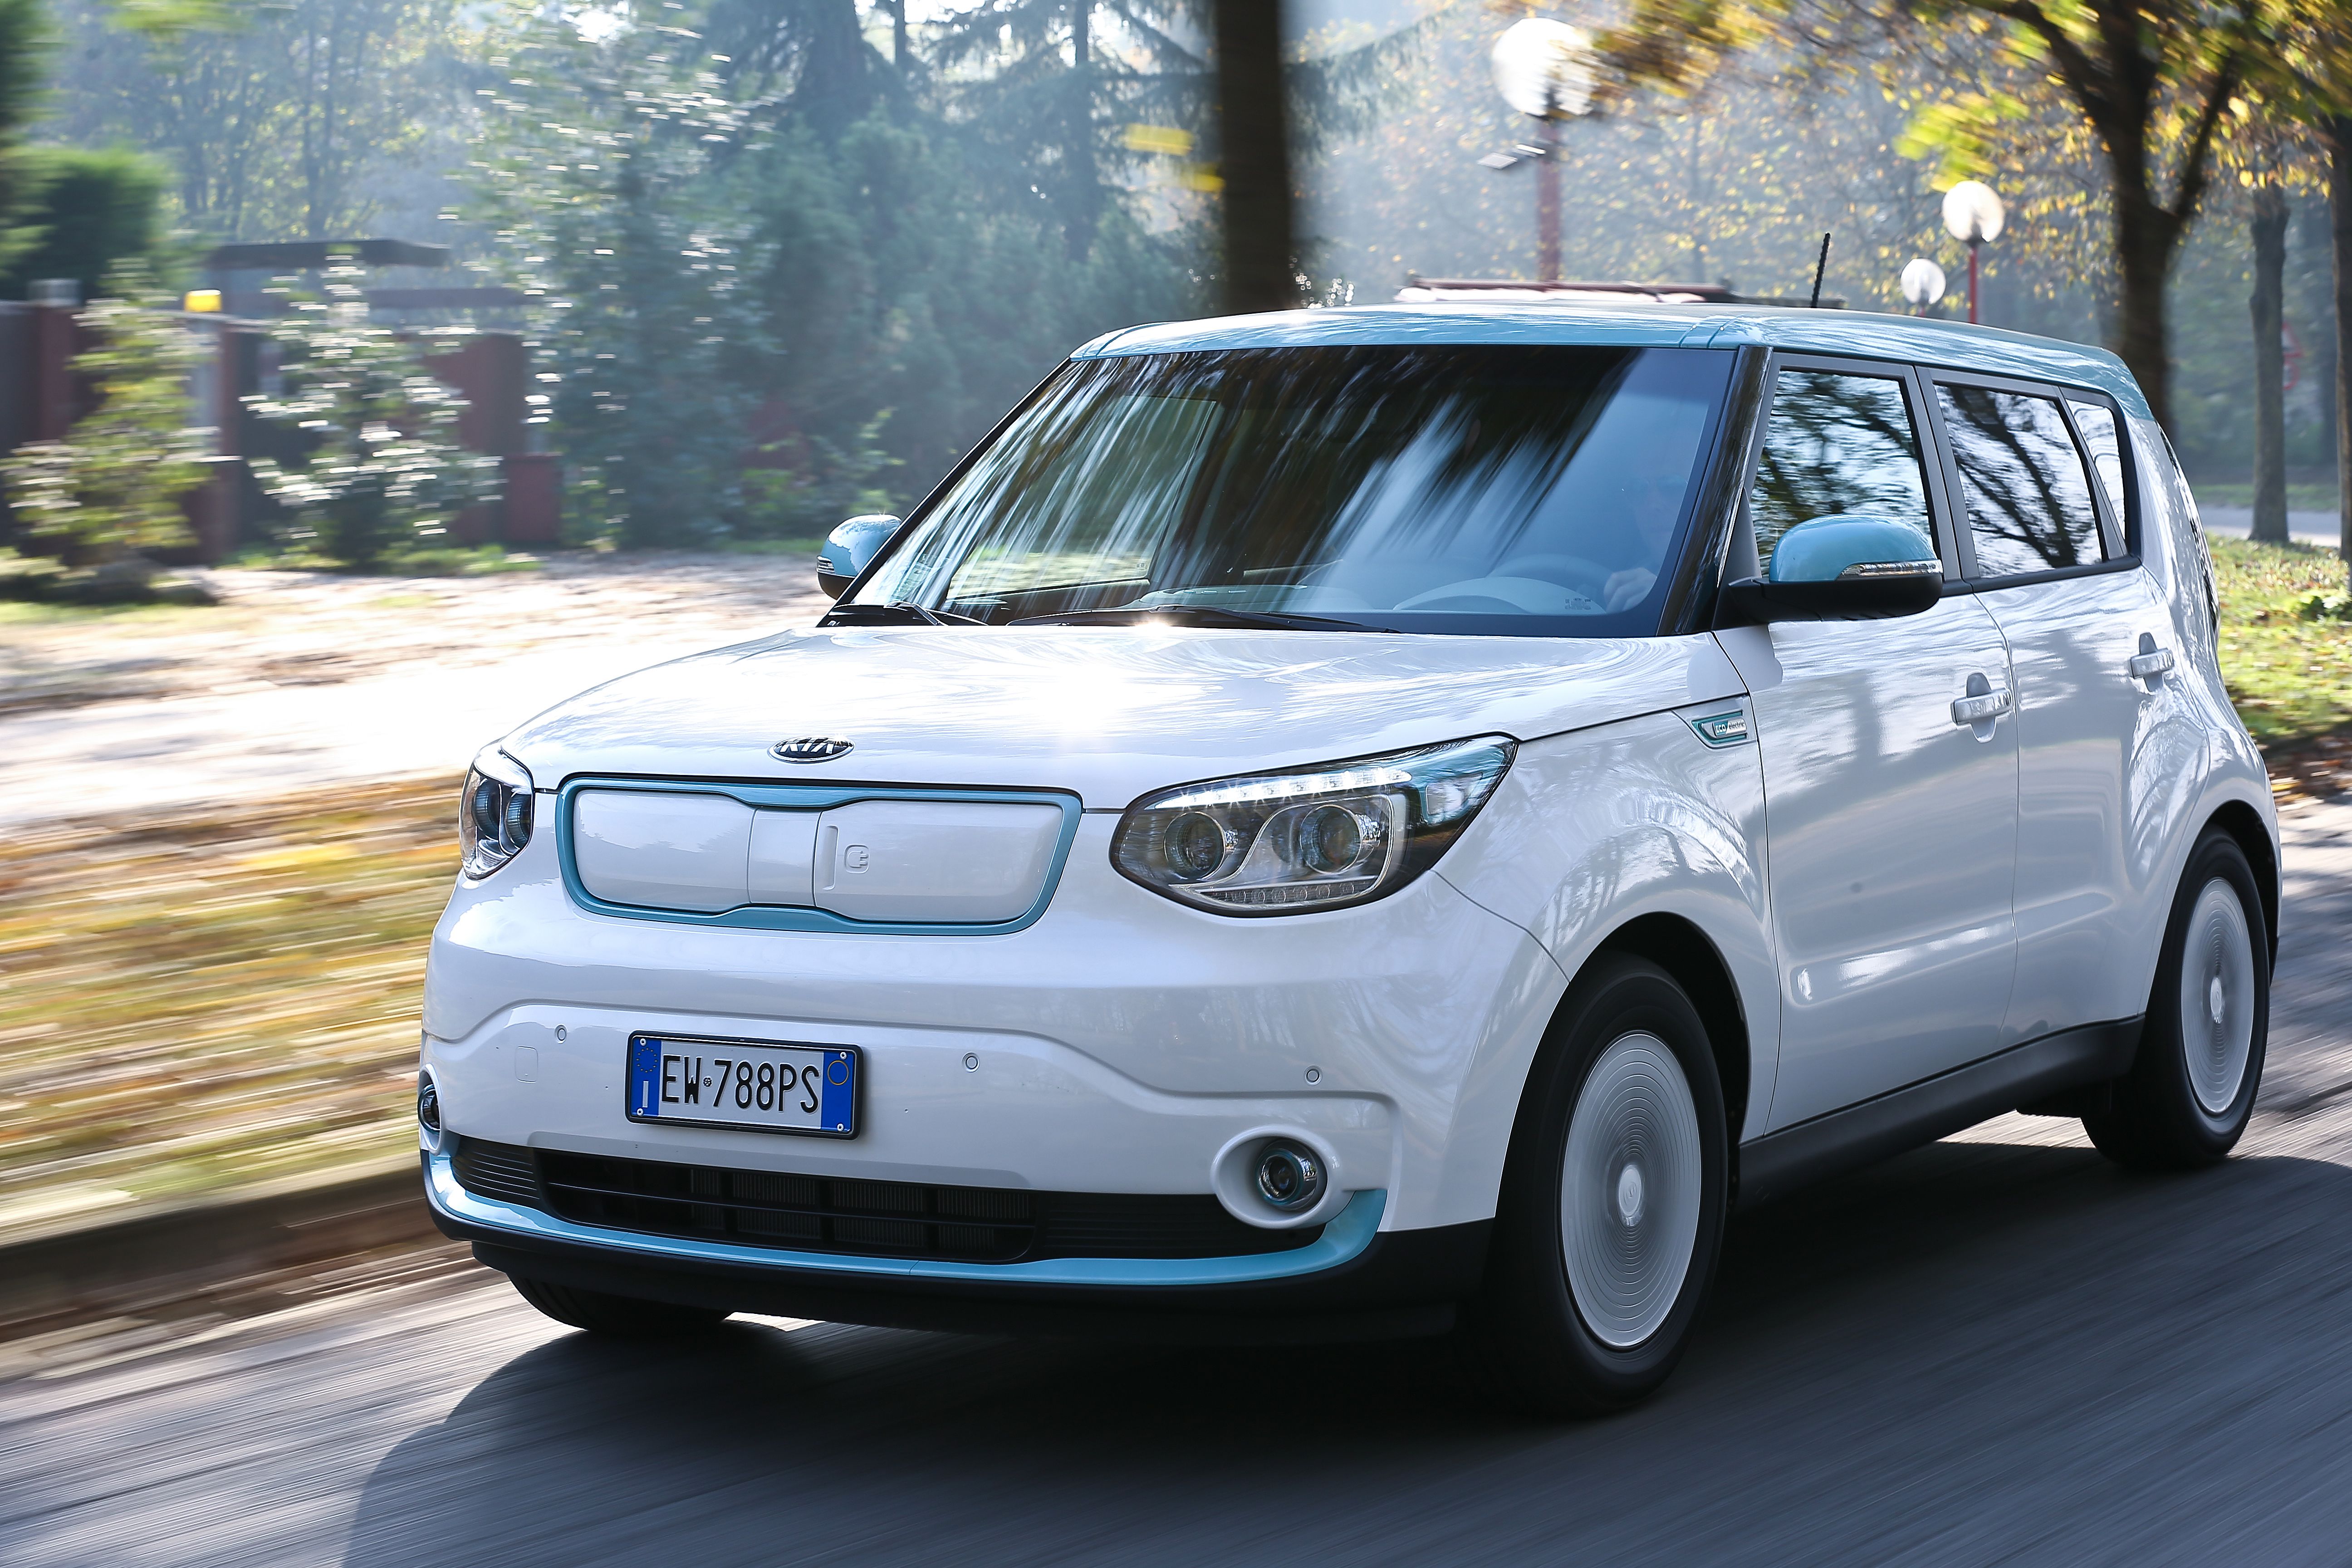 Free Download Kia Soul Wallpapers 33 Images Dodowallpaper 5184x3456 For Your Desktop Mobile Tablet Explore 53 Kia Soul Ev Wallpapers Kia Soul Ev Wallpapers Kia Wallpapers Kia Xceed Wallpapers